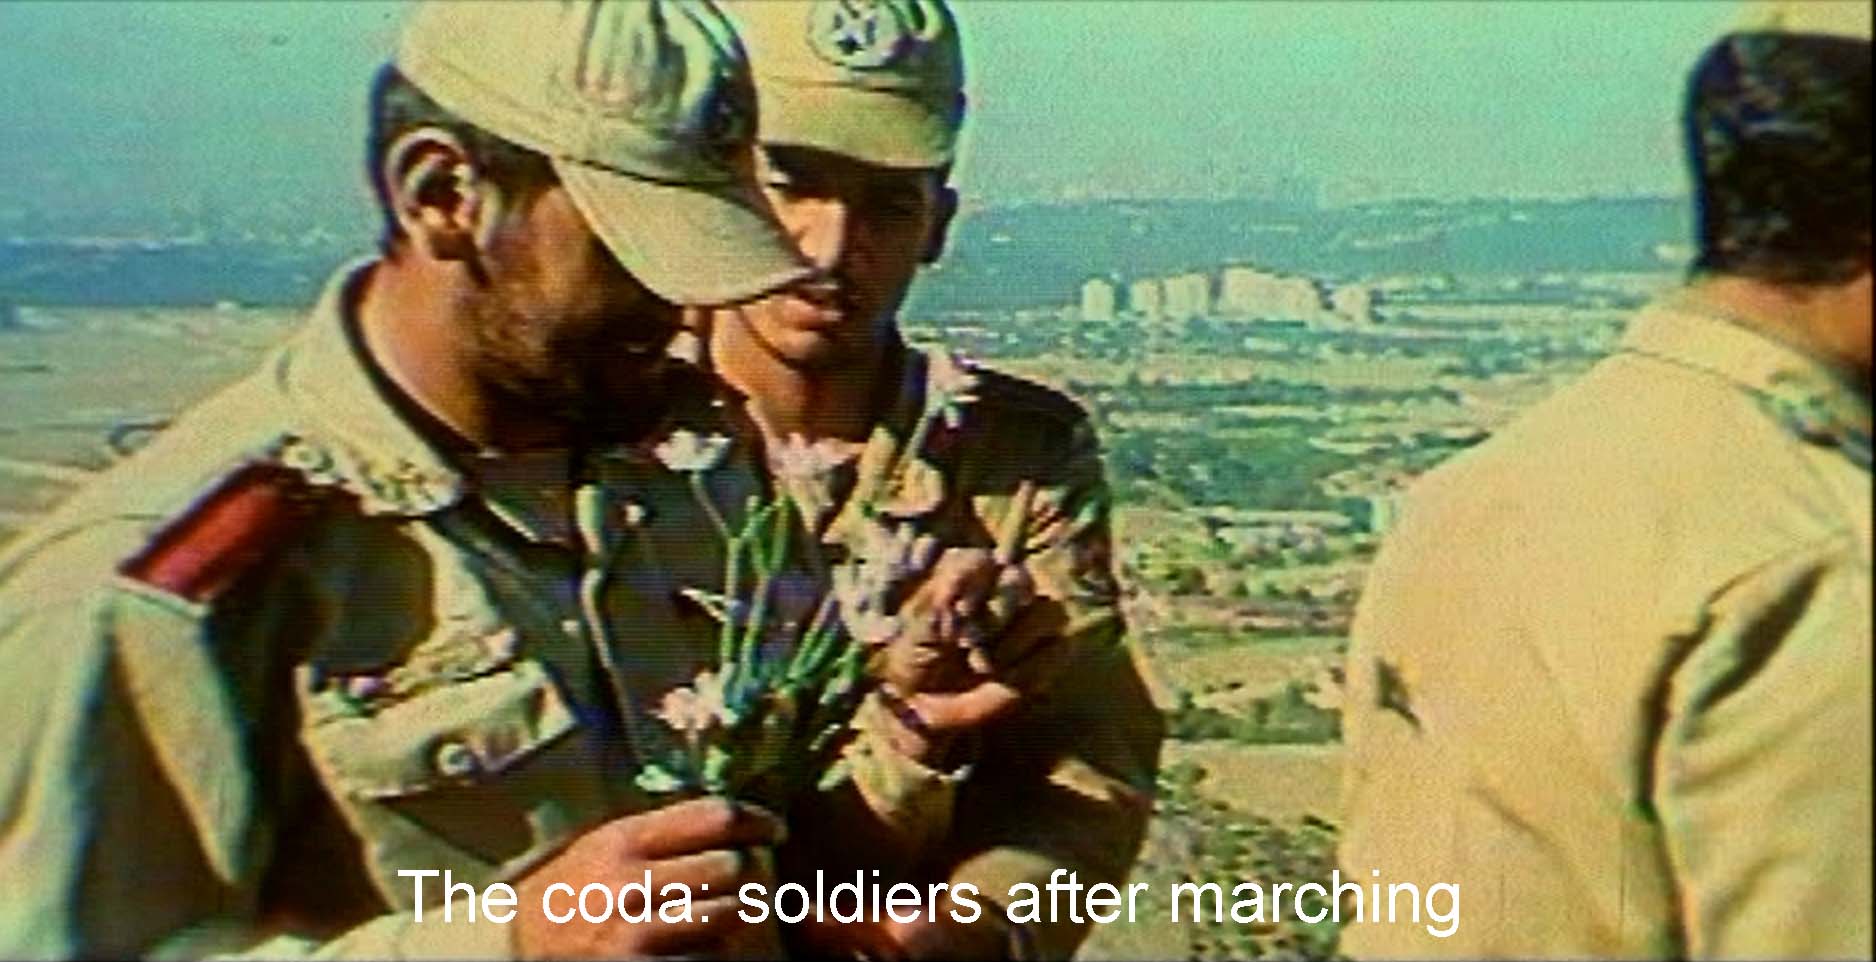 The coda: the soldiers after marching